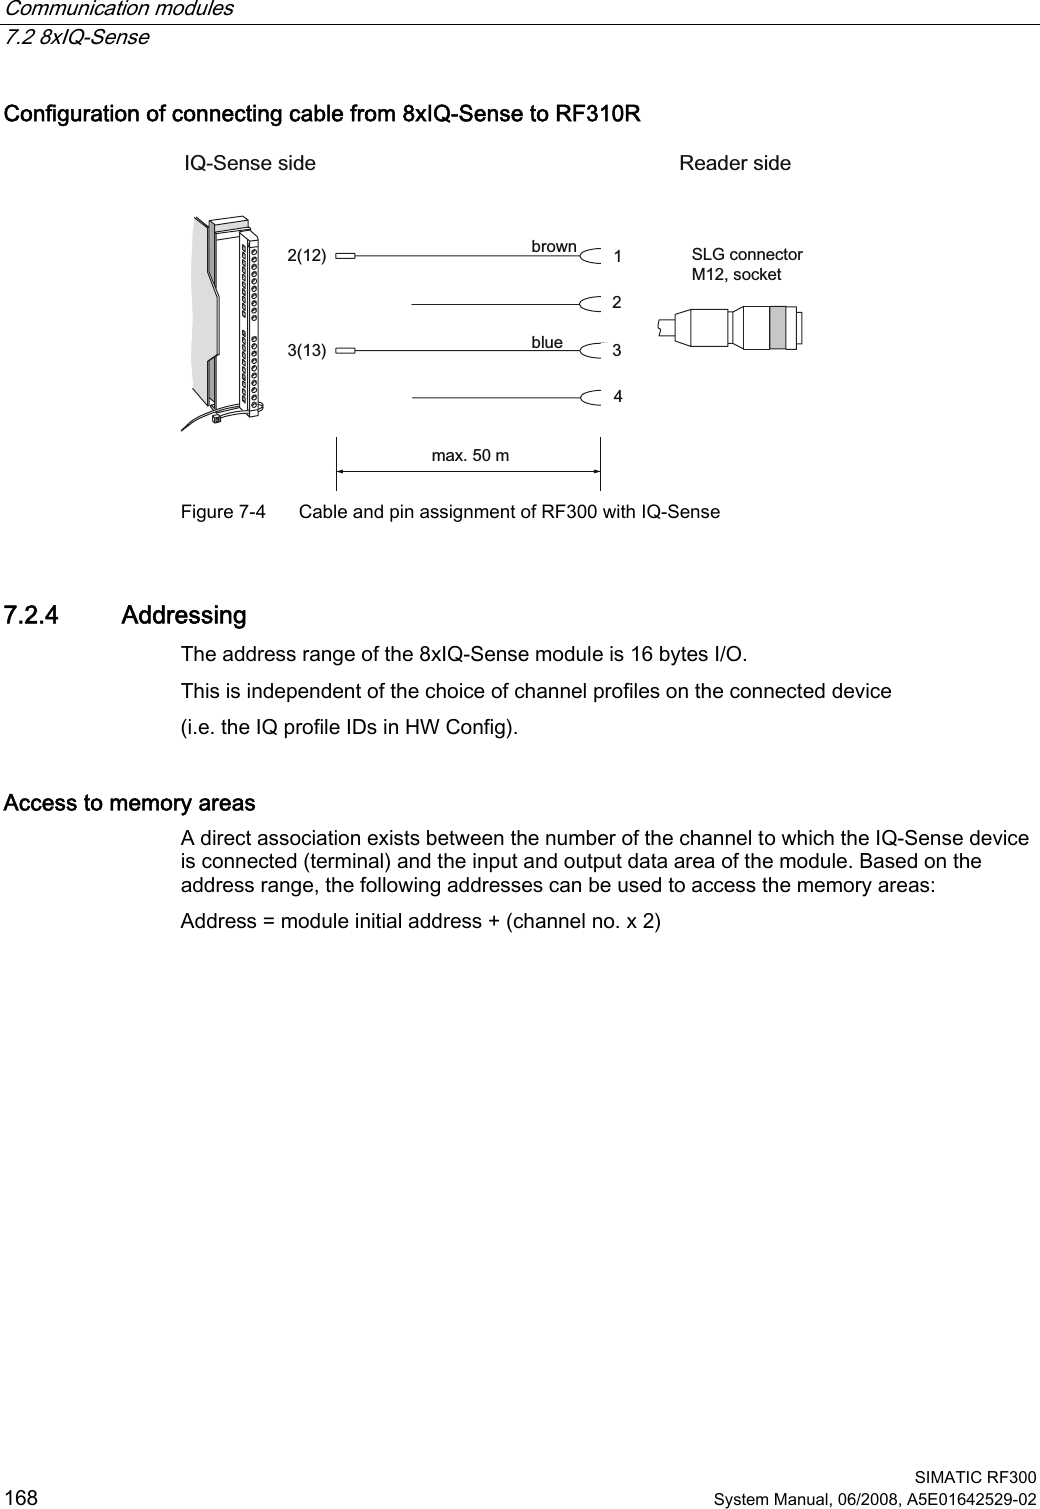 Communication modules   7.2 8xIQ-Sense  SIMATIC RF300 168 System Manual, 06/2008, A5E01642529-02 Configuration of connecting cable from 8xIQ-Sense to RF310R PD[P6/*FRQQHFWRU0VRFNHW5HDGHUVLGH,46HQVHVLGHEURZQEOXH Figure 7-4  Cable and pin assignment of RF300 with IQ-Sense 7.2.4 Addressing The address range of the 8xIQ-Sense module is 16 bytes I/O.  This is independent of the choice of channel profiles on the connected device (i.e. the IQ profile IDs in HW Config). Access to memory areas A direct association exists between the number of the channel to which the IQ-Sense device is connected (terminal) and the input and output data area of the module. Based on the address range, the following addresses can be used to access the memory areas: Address = module initial address + (channel no. x 2) 